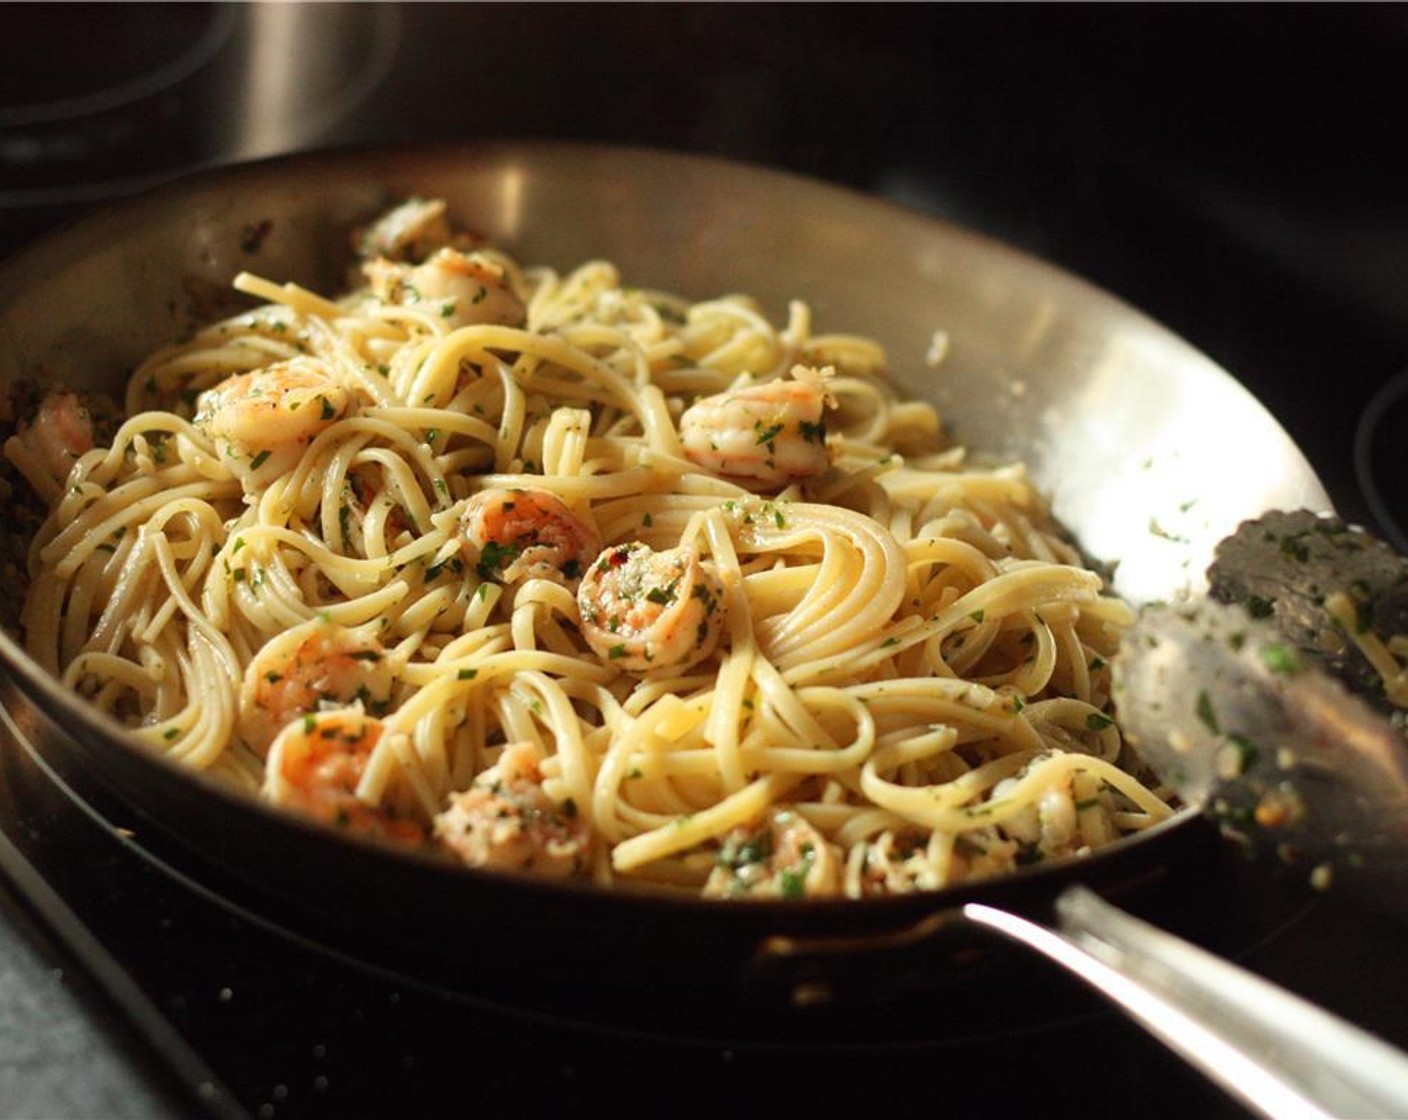 step 6 When al denté, drain the linguine in a colander and add it to the shrimp mixture. Toss to coat all pasta.